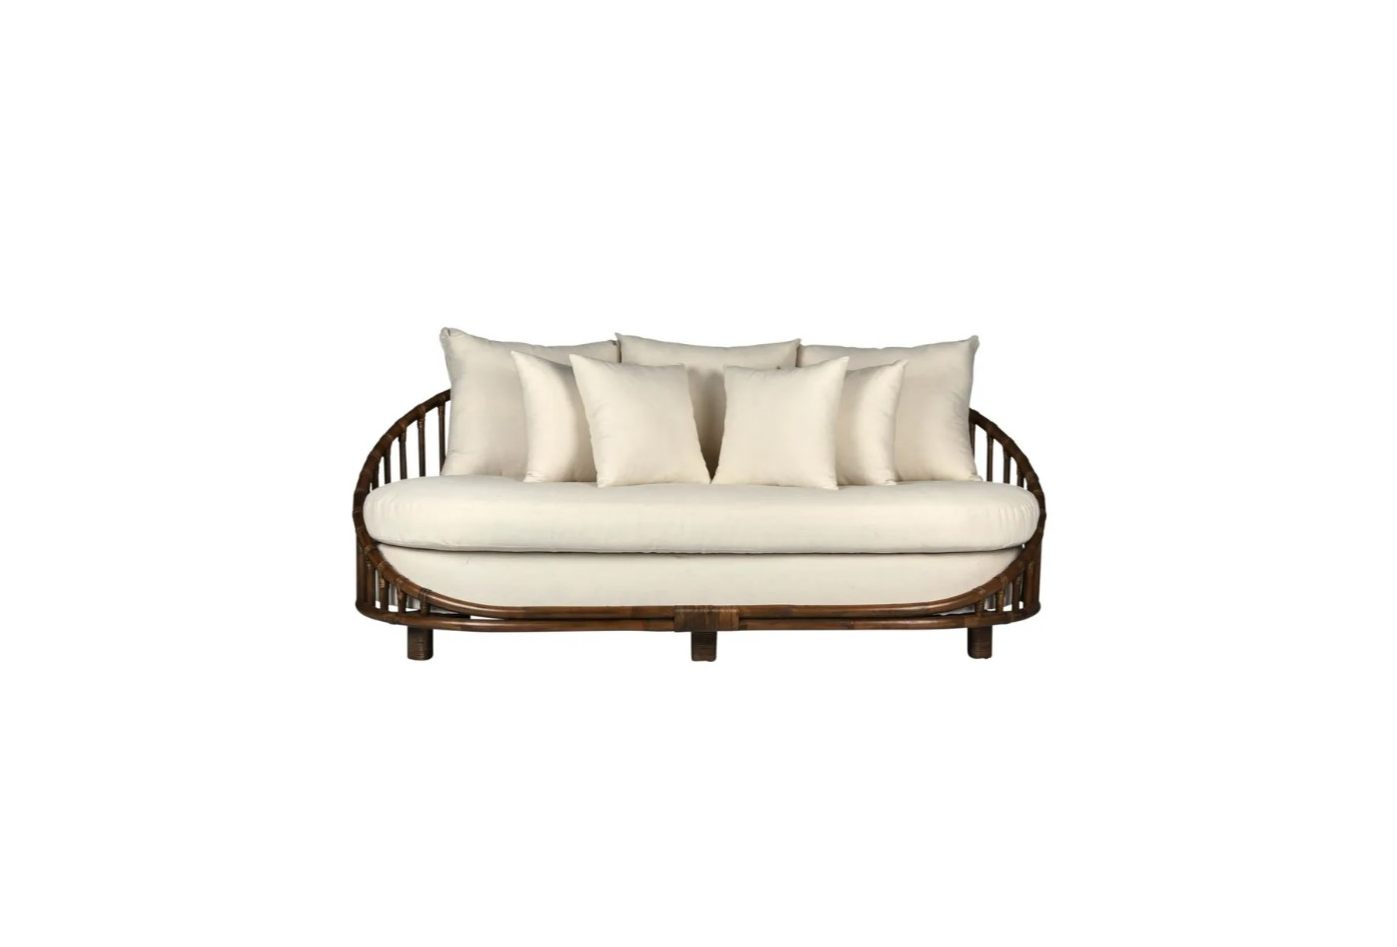 Palm Cove Rattan Occasional 3 Seater Sofa - Brown